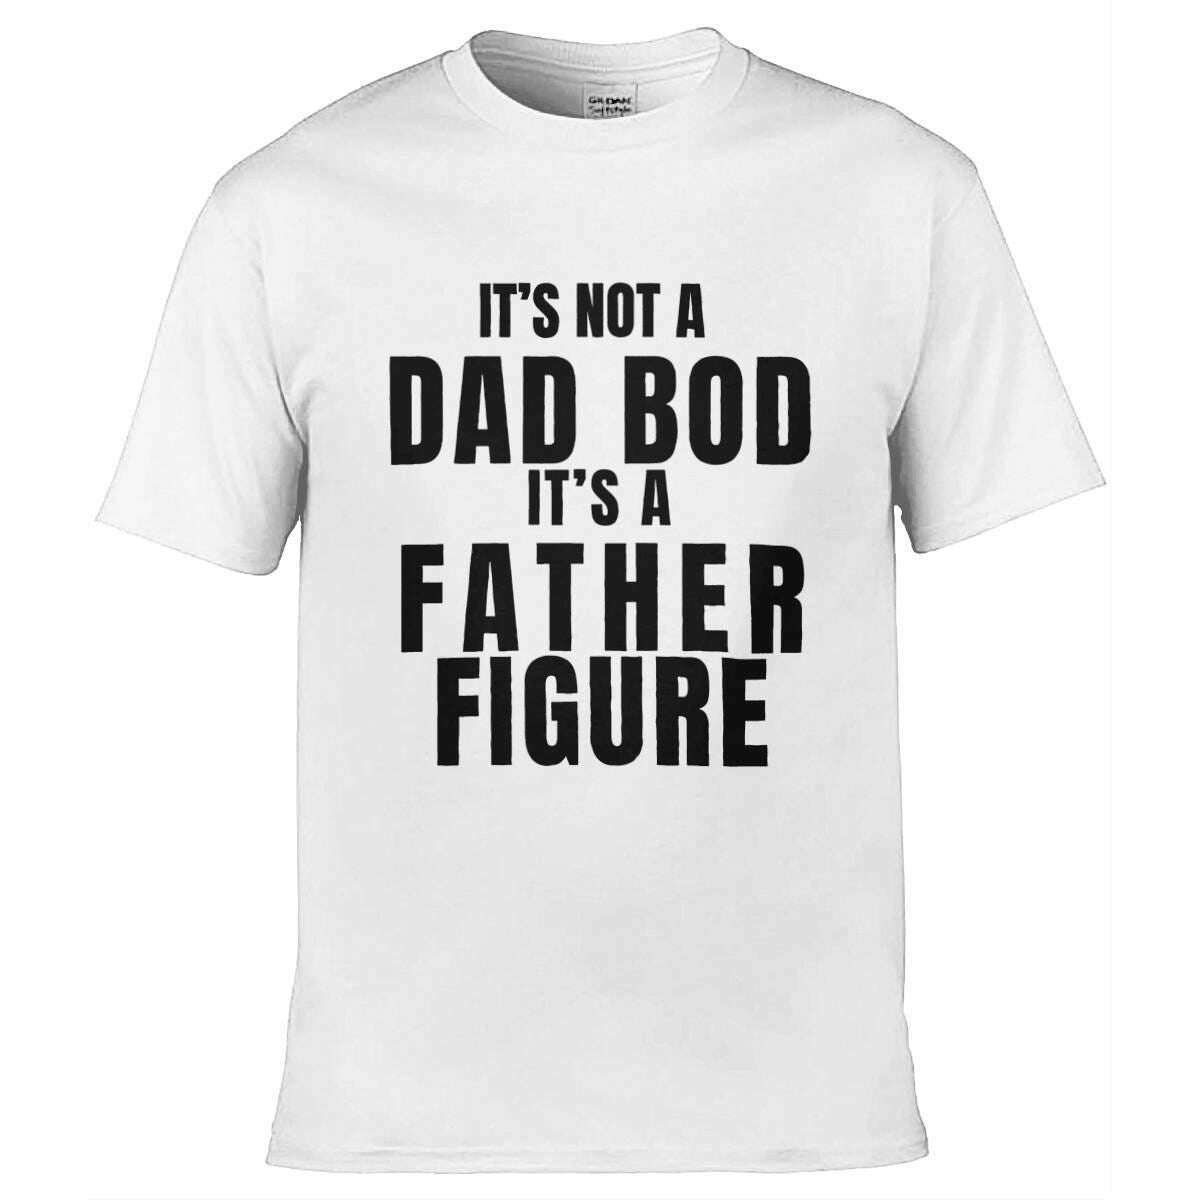 Teemarkable! It’s Not A Dad Bod It’s A Father Figure T-Shirt